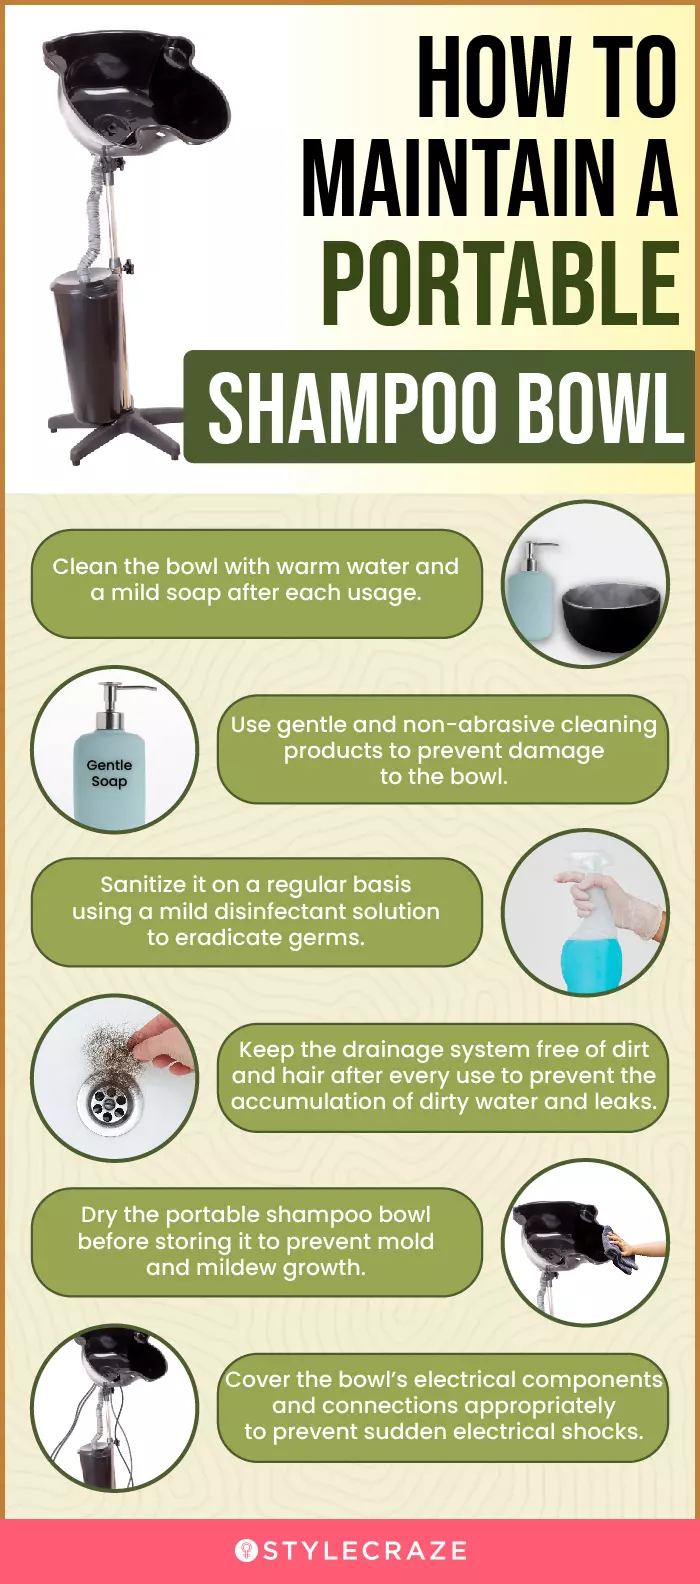 How To Maintain A Portable Shampoo Bowl (infographic)